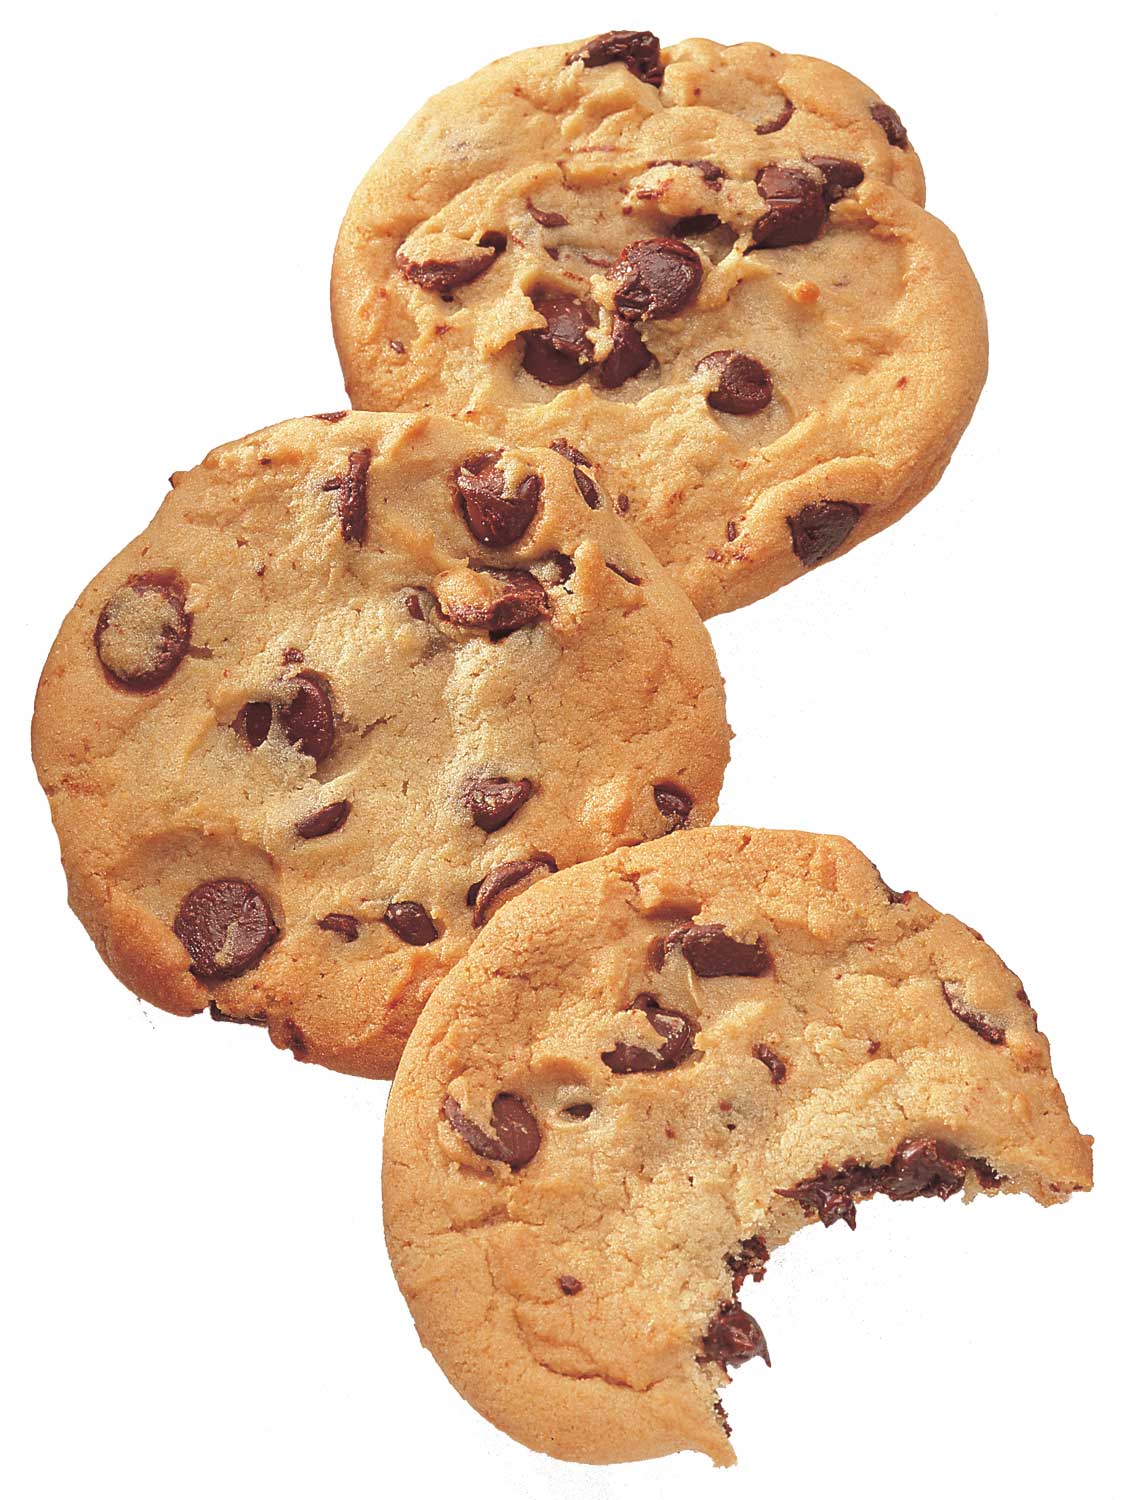 Country Home Bakers Mrs. GoodCookie Chocolate Chip Cookie Dough, 4 Ounces - 60 per case.